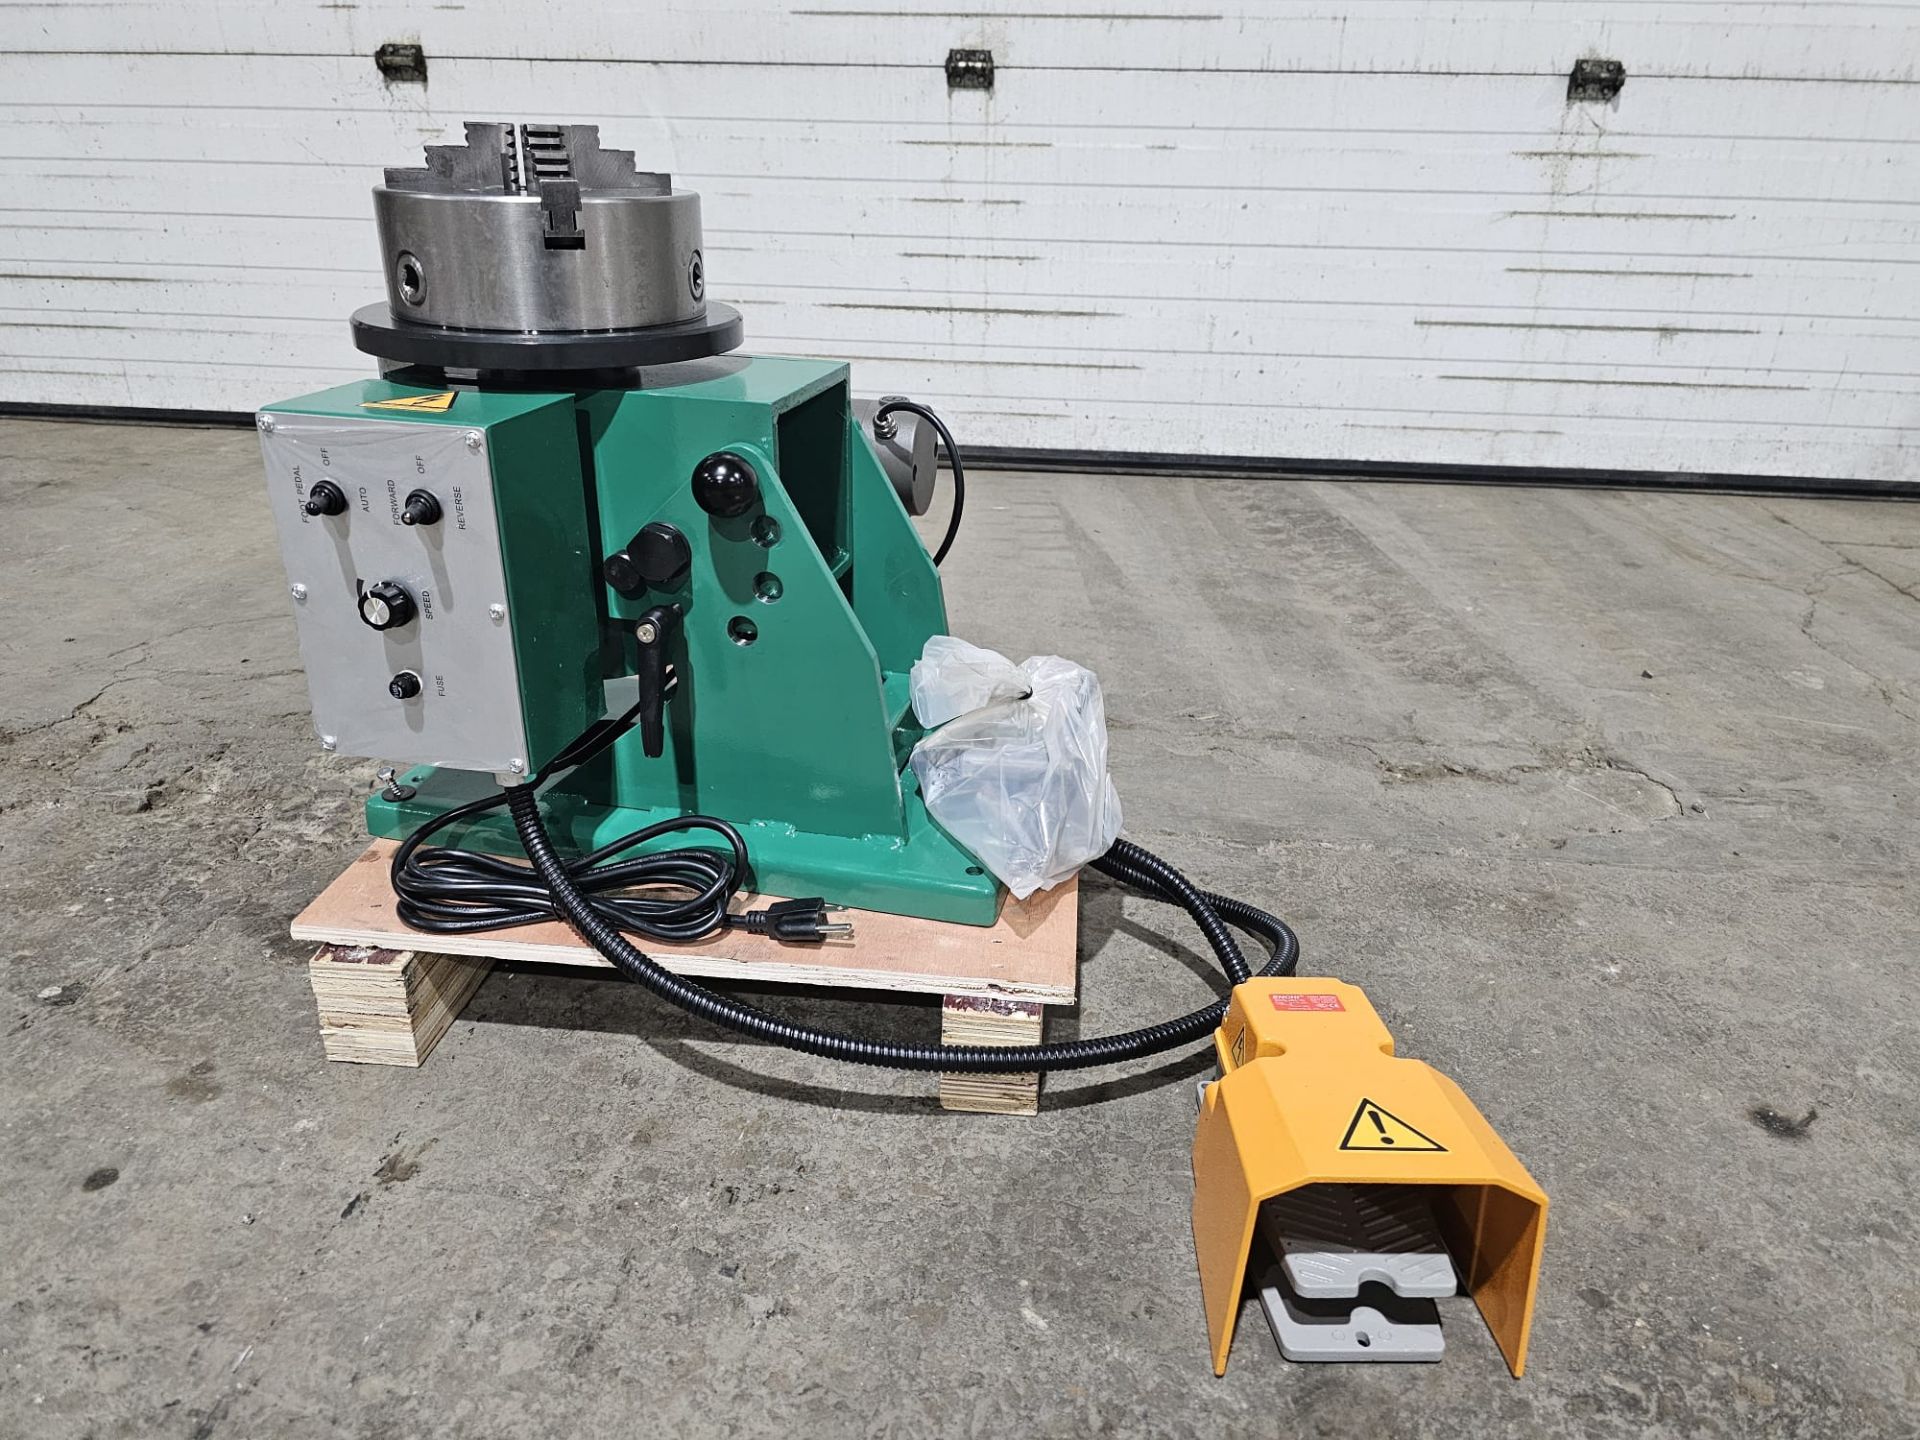 Verner model VP-110 WELDING POSITIONER 250lbs Capacity with 3-Jaw Chuck - tilt and rotate with